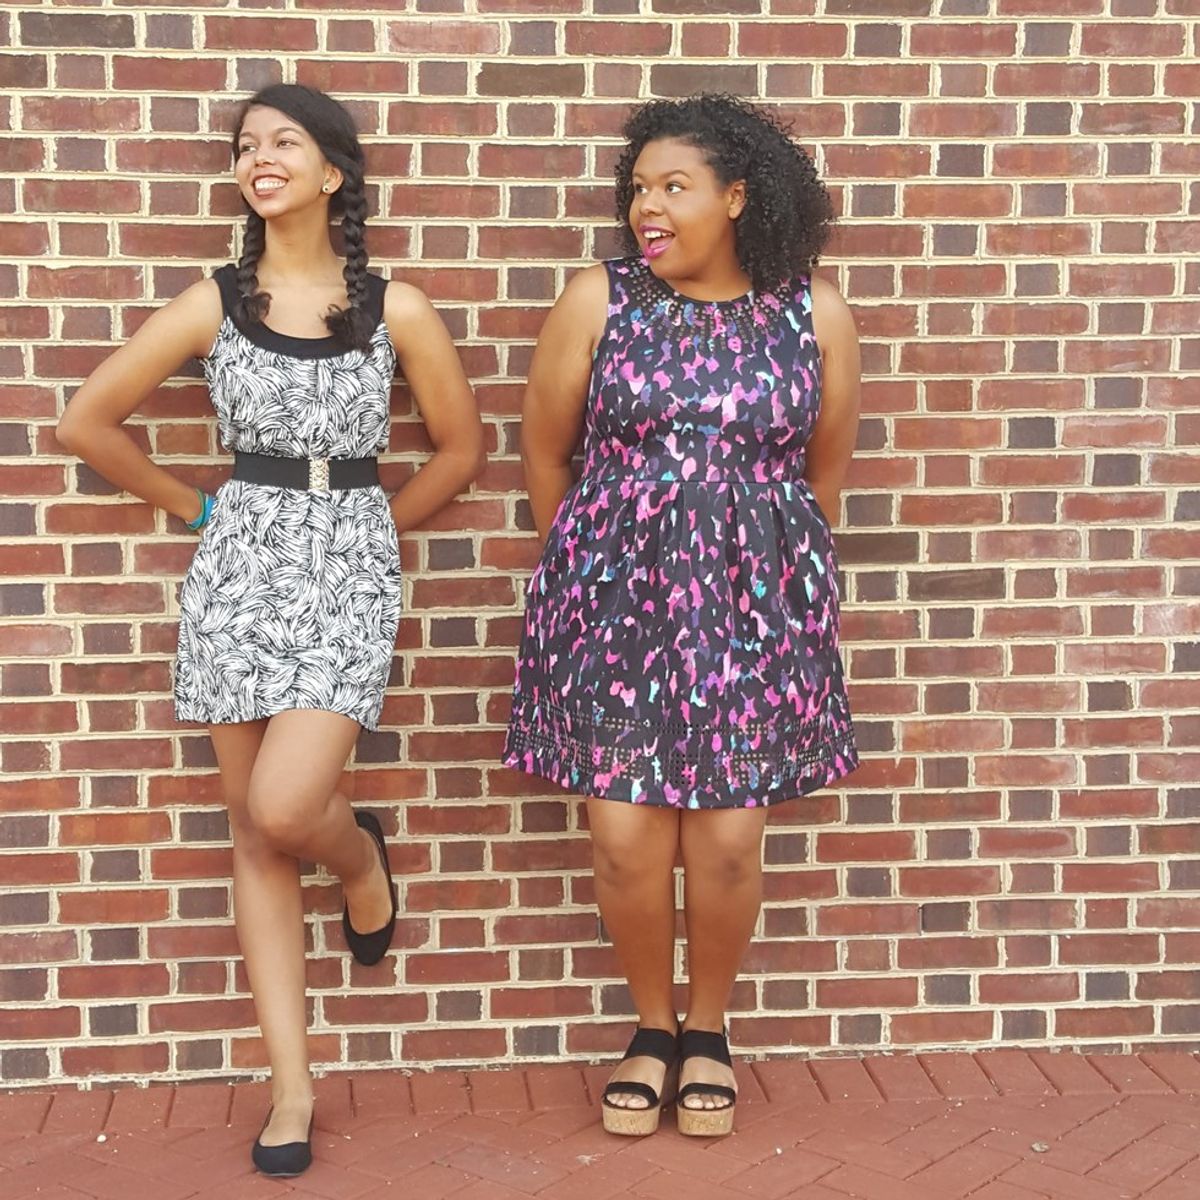 15 Things You May Understand If You're A Mixed Girl